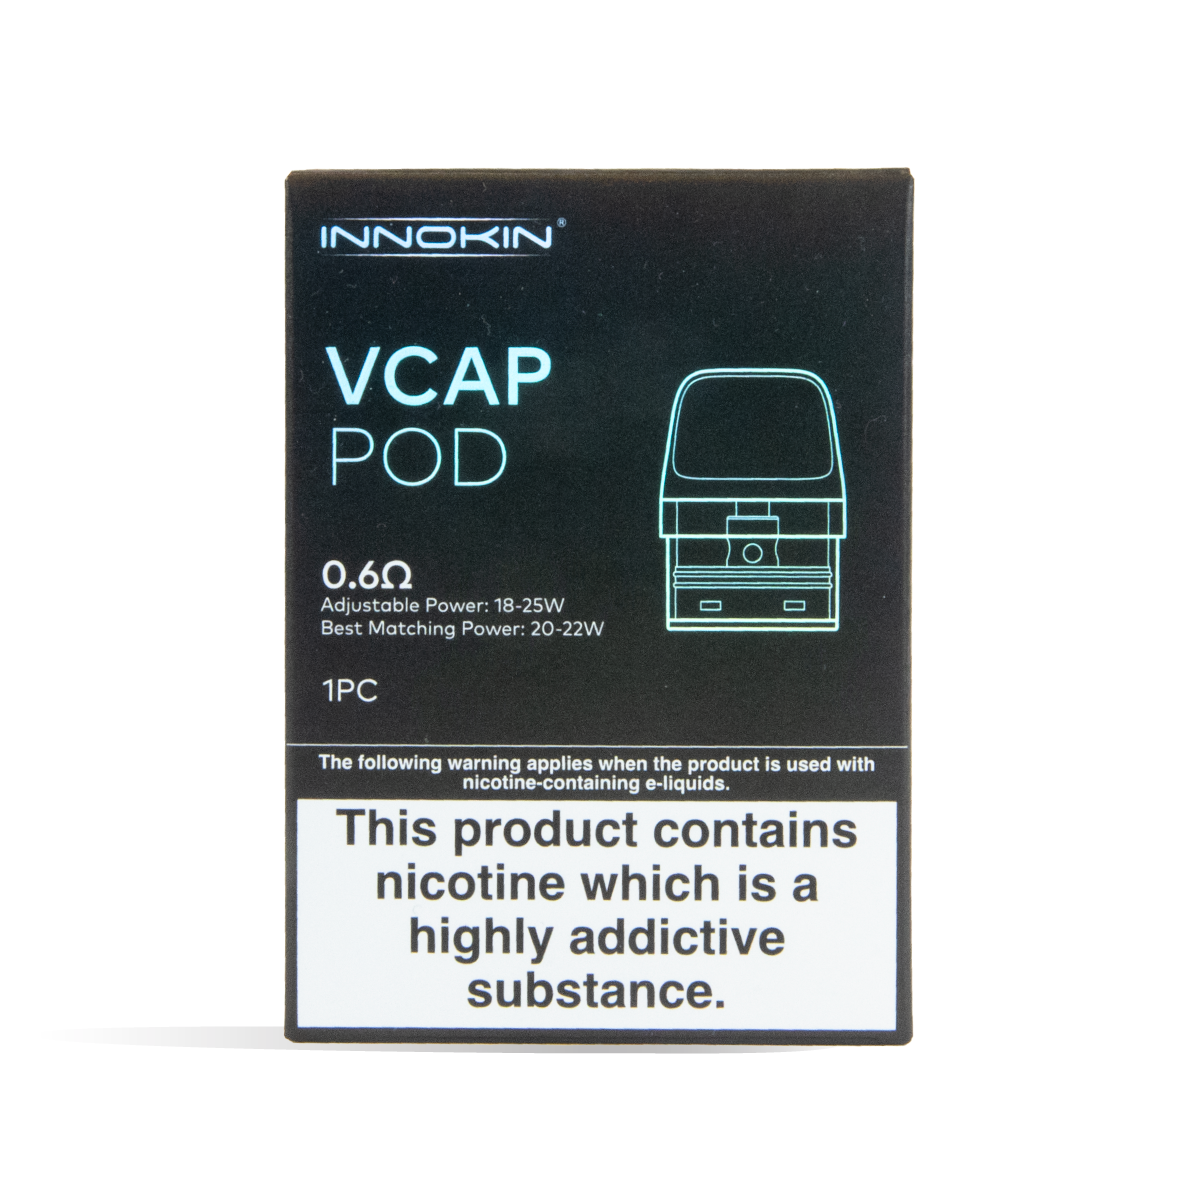 Innokin Vcap Pod Replacement (Single Pack) for UK wholesale